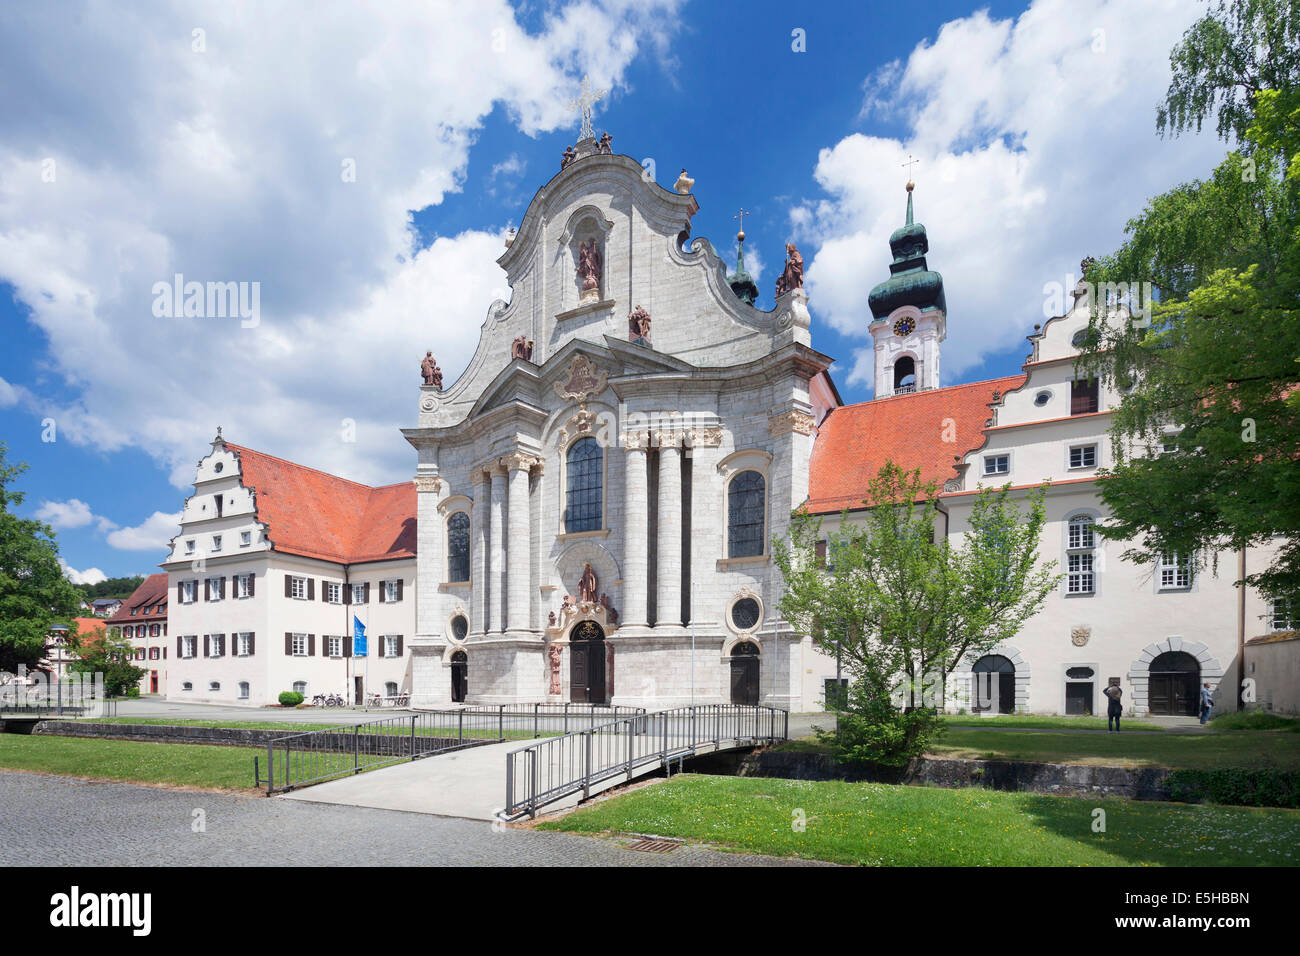 Monastery with baroque Zwiesel Cathedral, Swabian Jura, Baden-Württemberg, Germany Stock Photo